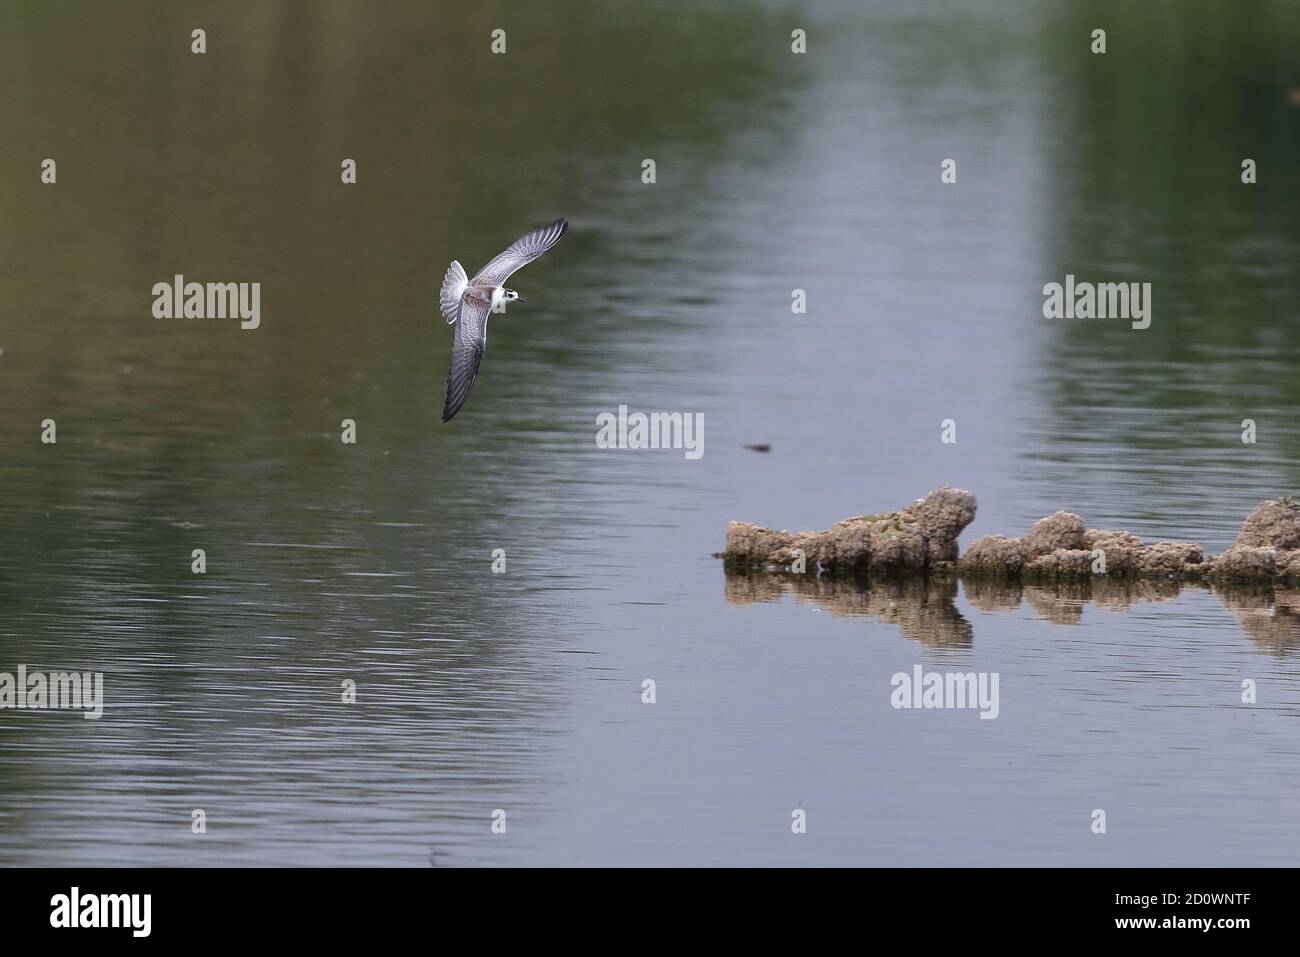 Juvenile White Winged Tern around pools at Cantley Stock Photo